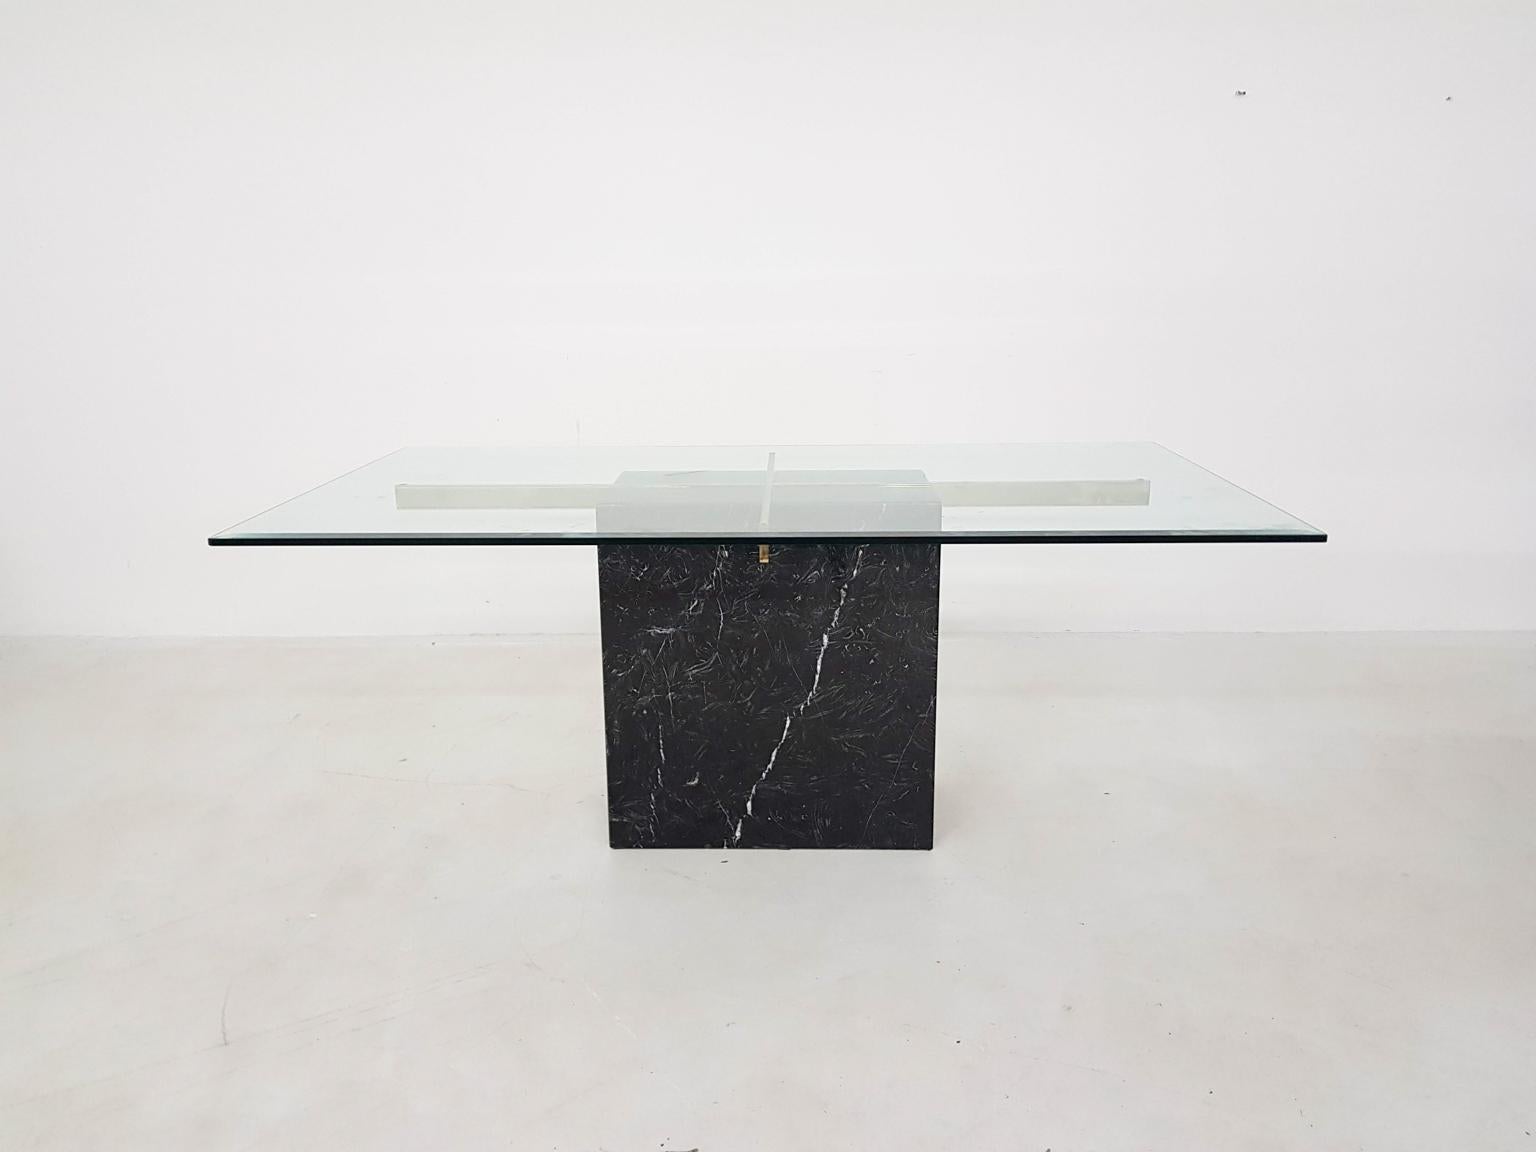 Black marble dining table with brass details which holds the glass top.

The glass top has a scratch on the top.